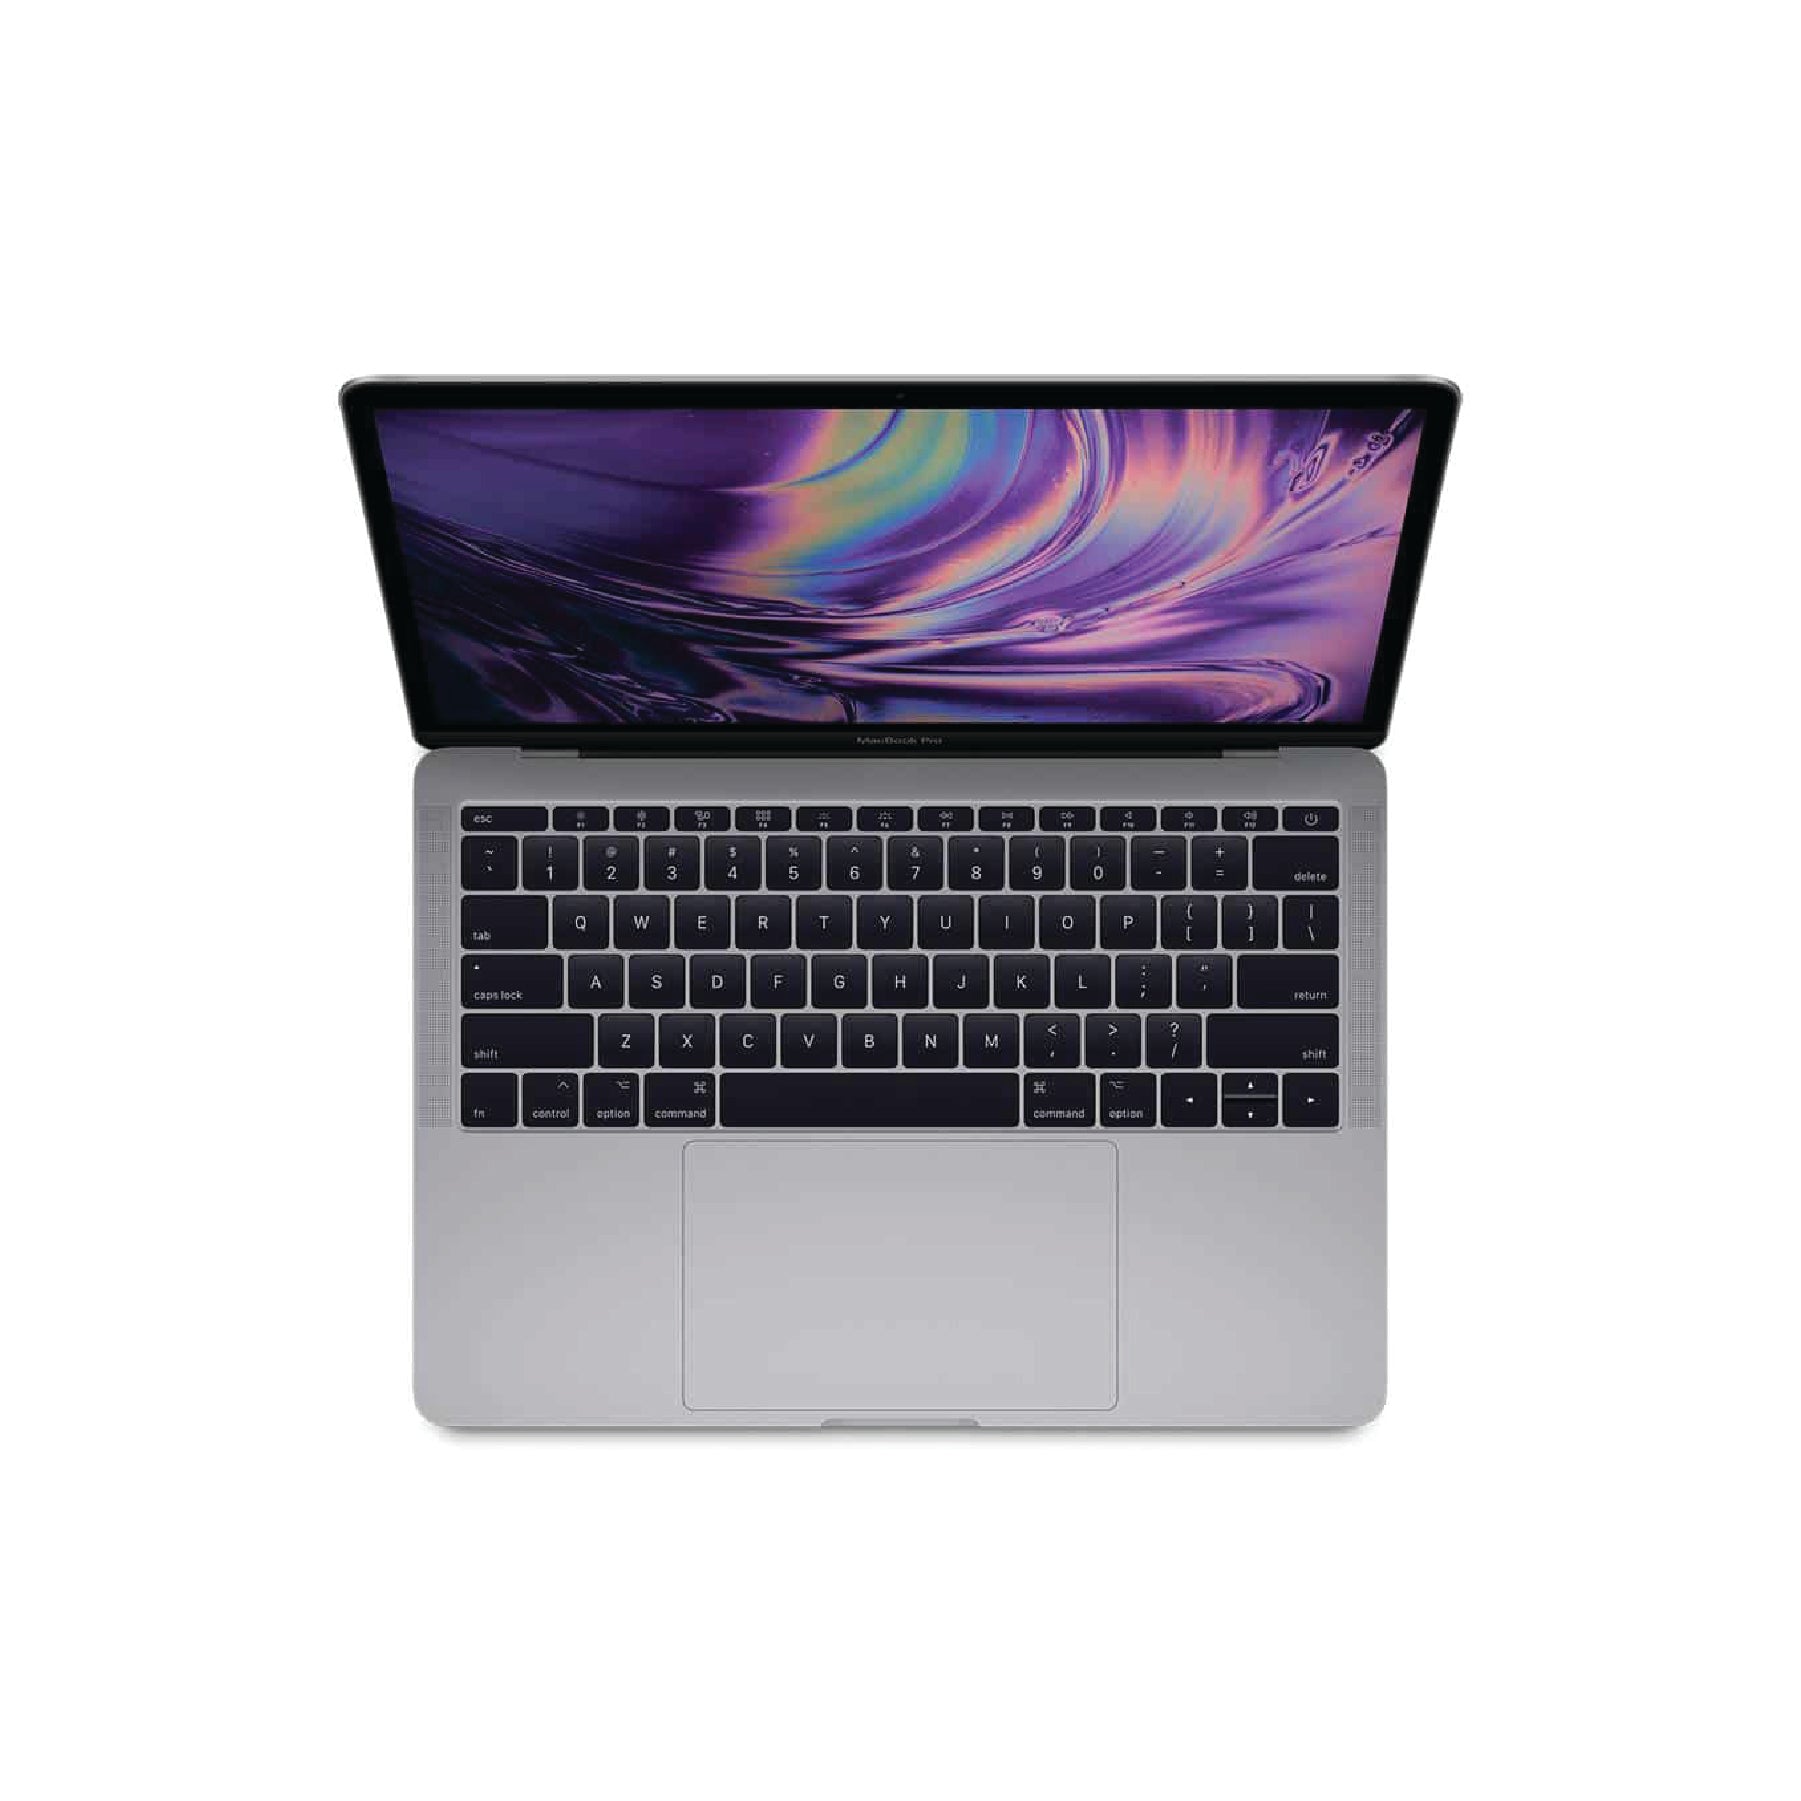 MacBook Pro (13-inch, 2017, Two Thunderbolt 3 ports) 2.3GHz, Intel Core i5 128GB - Space Grey (Better) - iStore Pre-owned